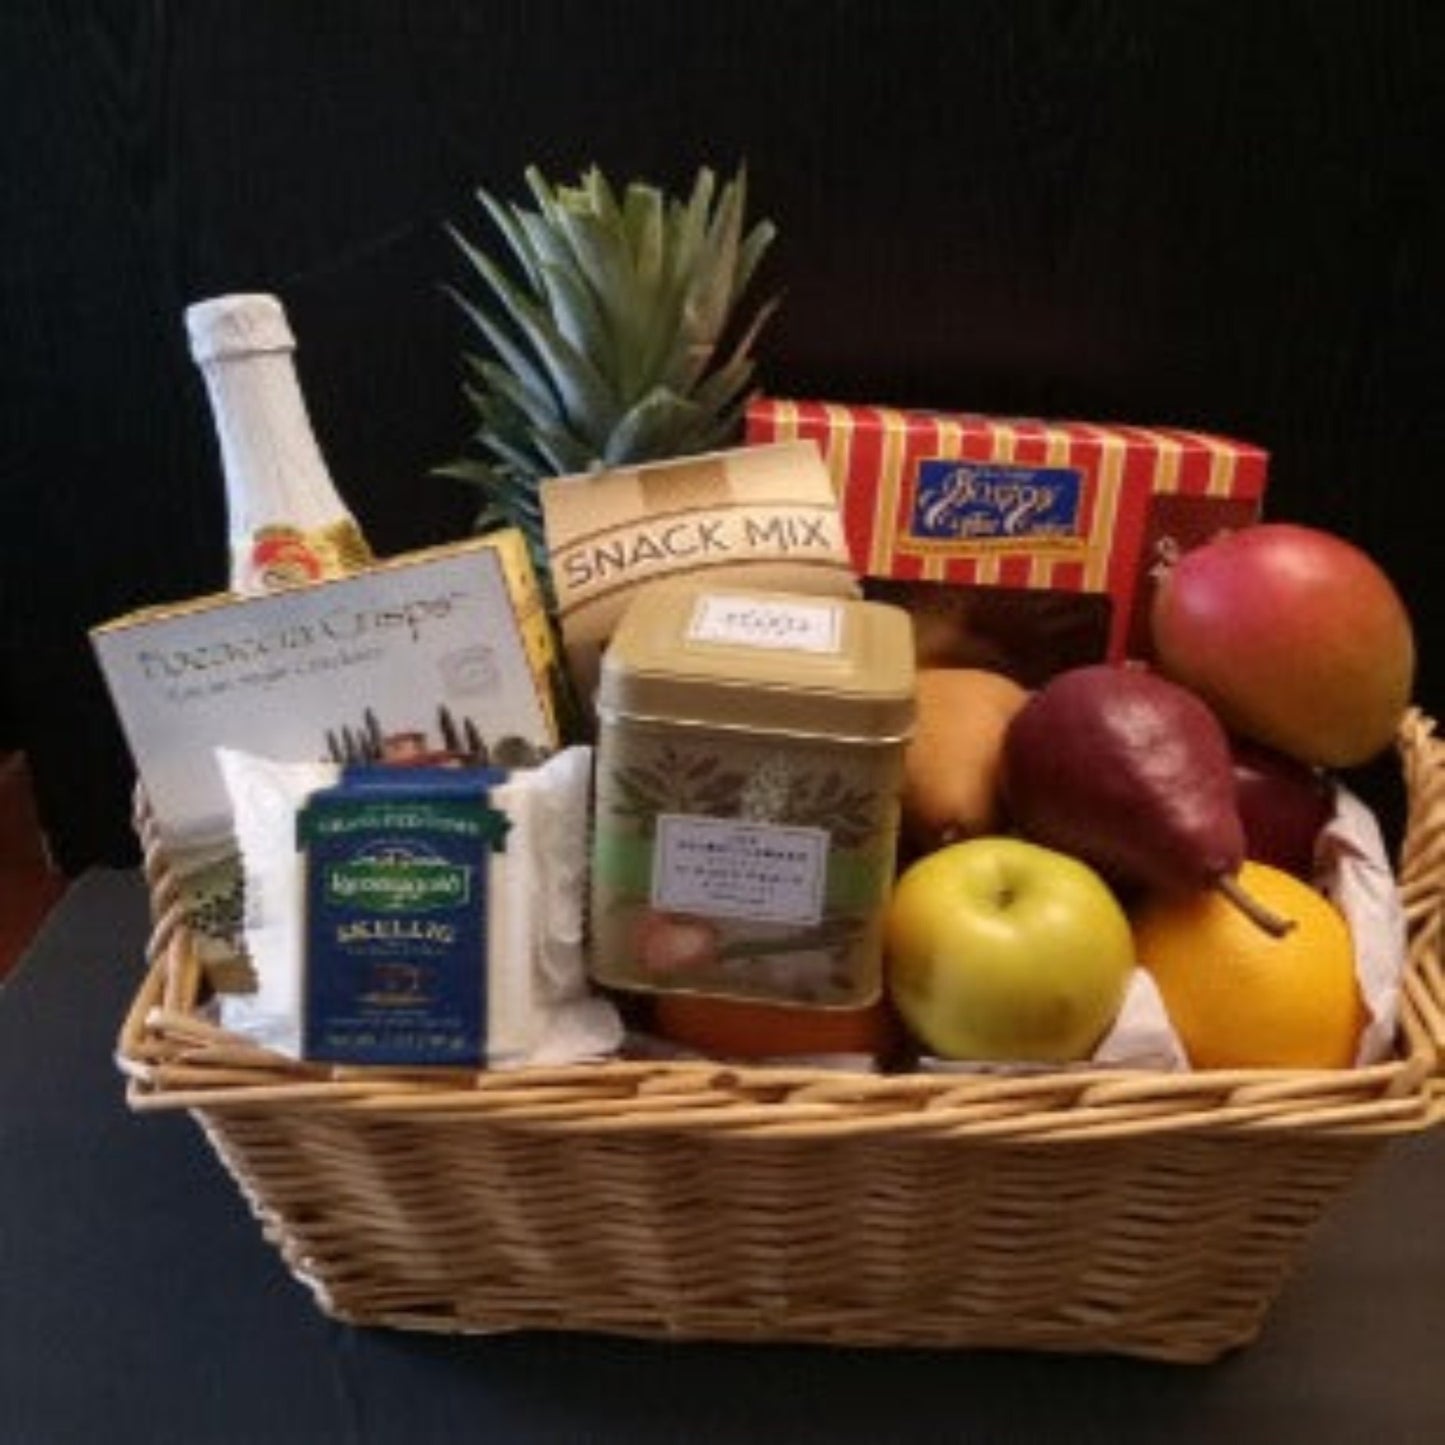 pineapple, red pears, apples, fresh pastry, and tea in this gift basket for delivery